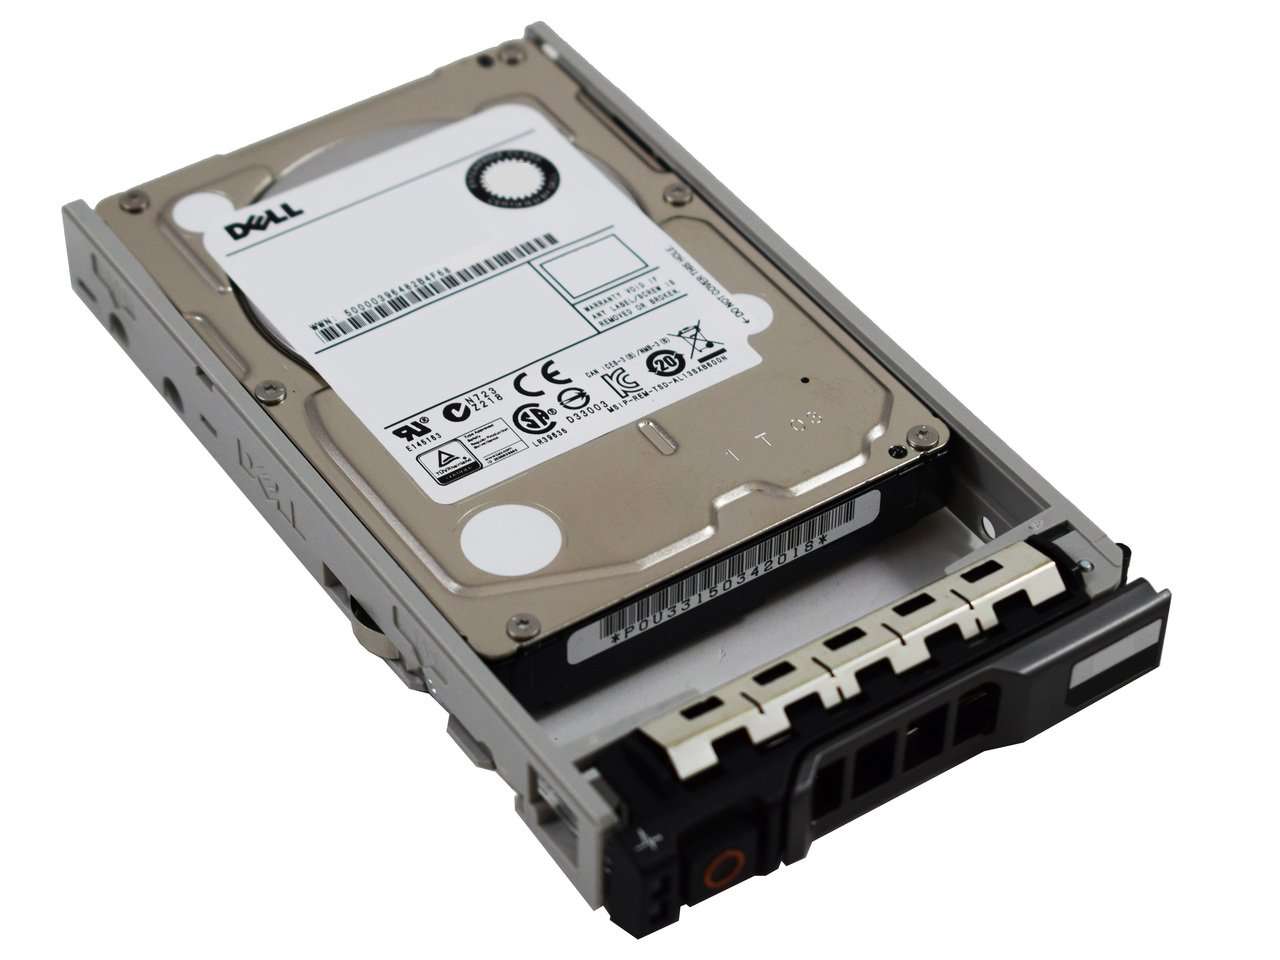 Dell G13 07T0DW 600GB 10K RPM SAS 6Gb/s 512n 2.5" Manufacturer Recertified HDD